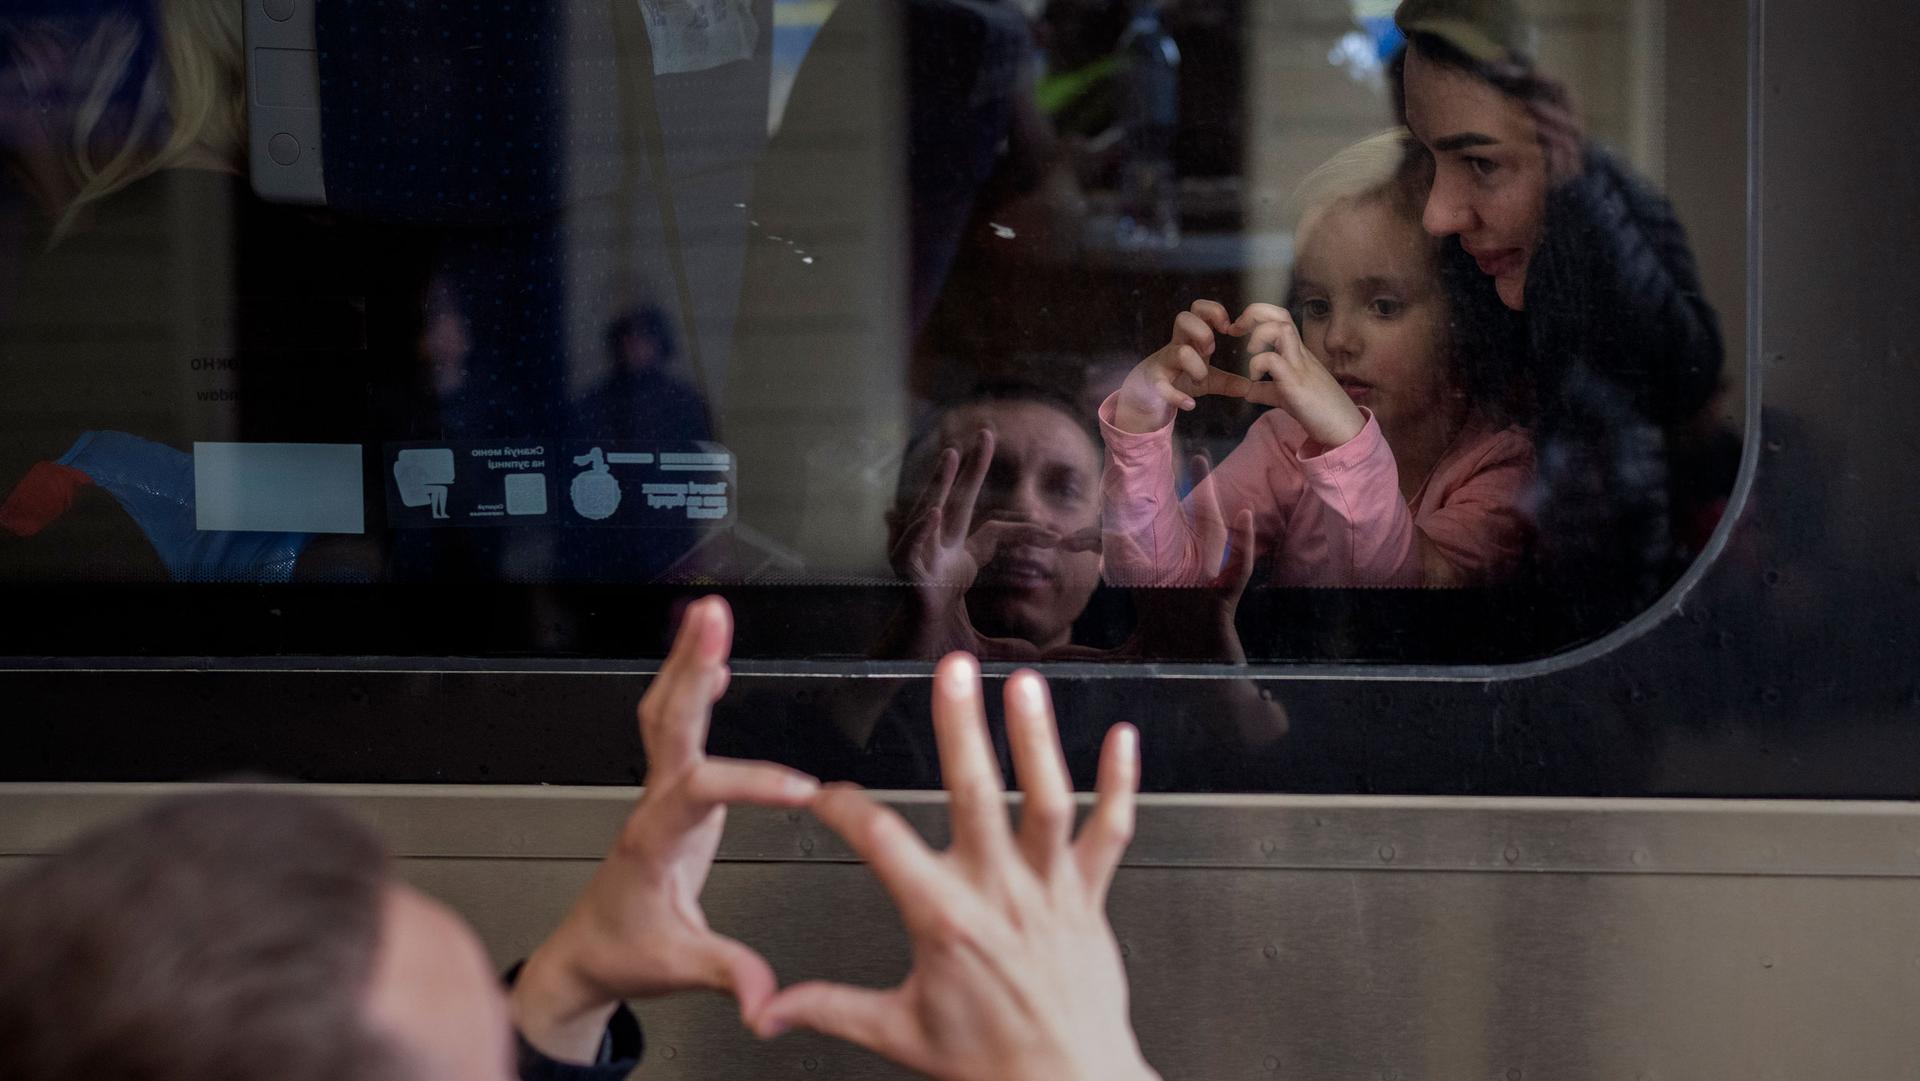 Ukrainian Nicolai, 41, says goodbye to his daughter Elina, 4, and his wife Lolita, on a train bound for Poland fleeing from the war at the train station in Lviv, western Ukraine, Friday, April 15, 2022.